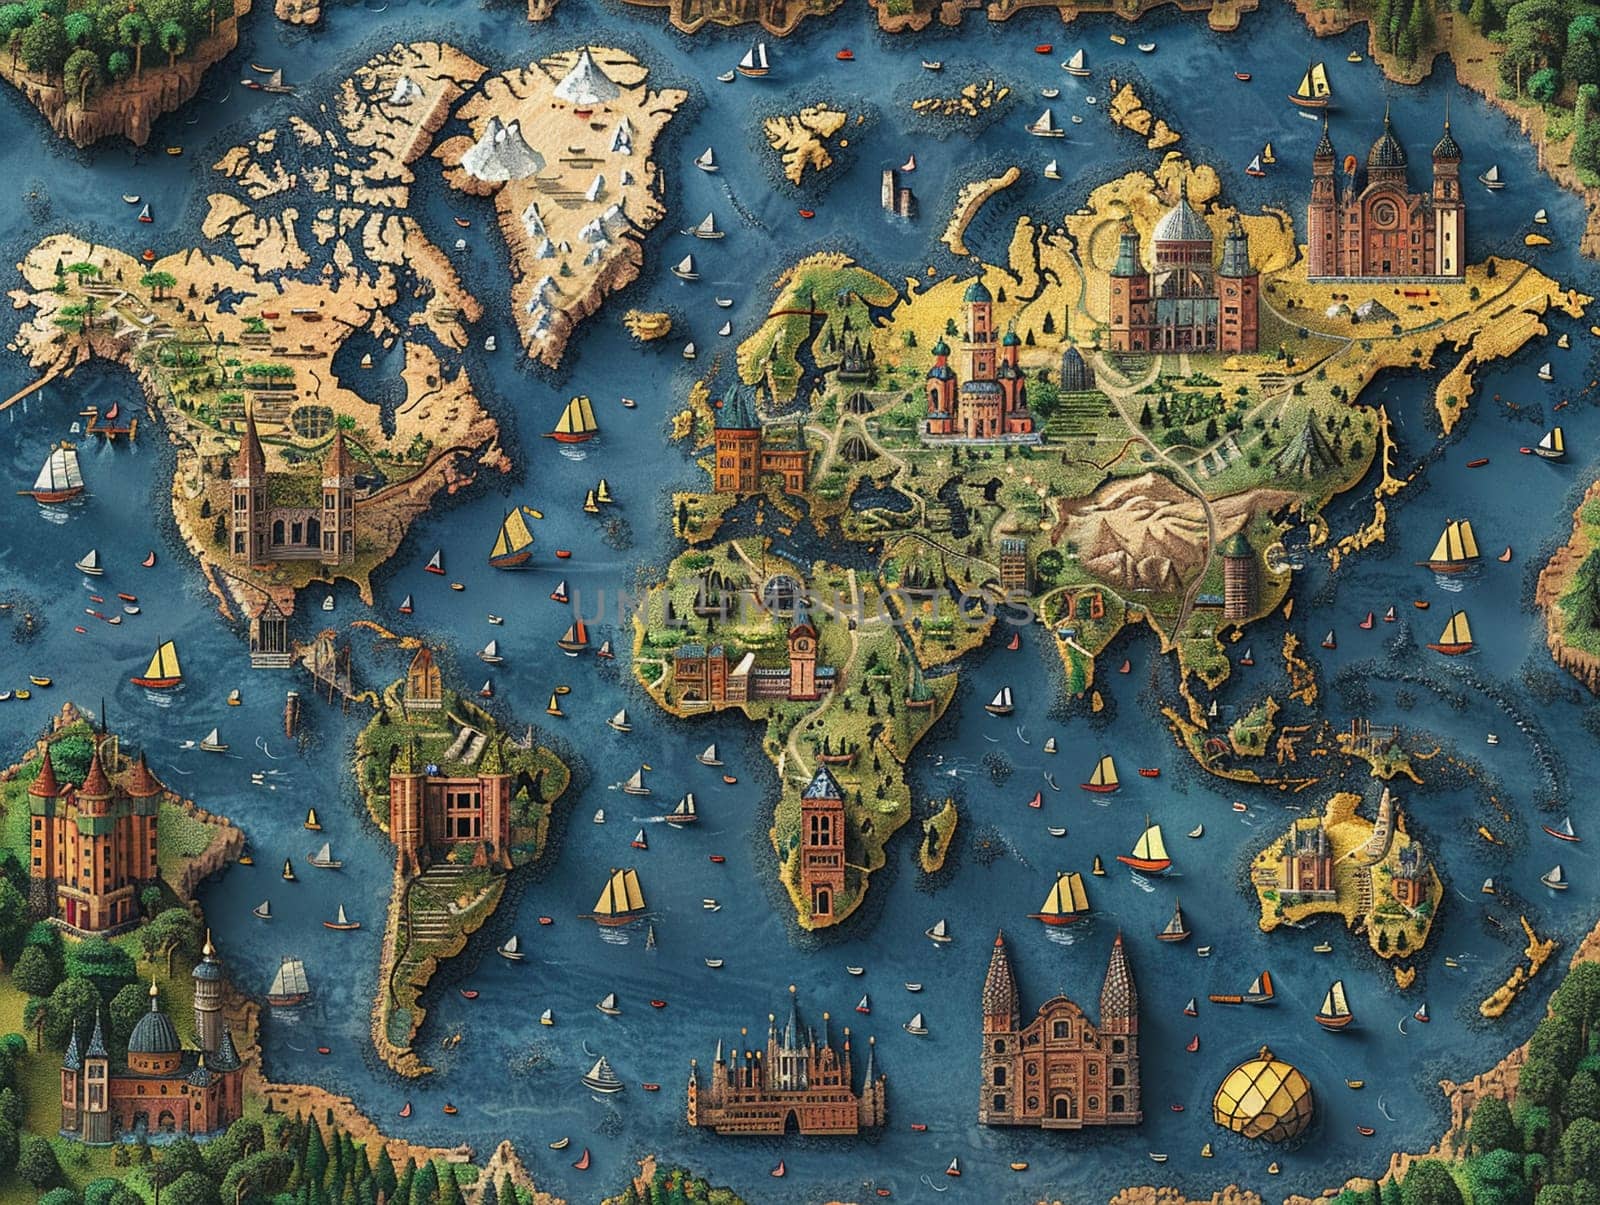 World map in a unique digital art style, creatively highlighting different cultures and landmarks.